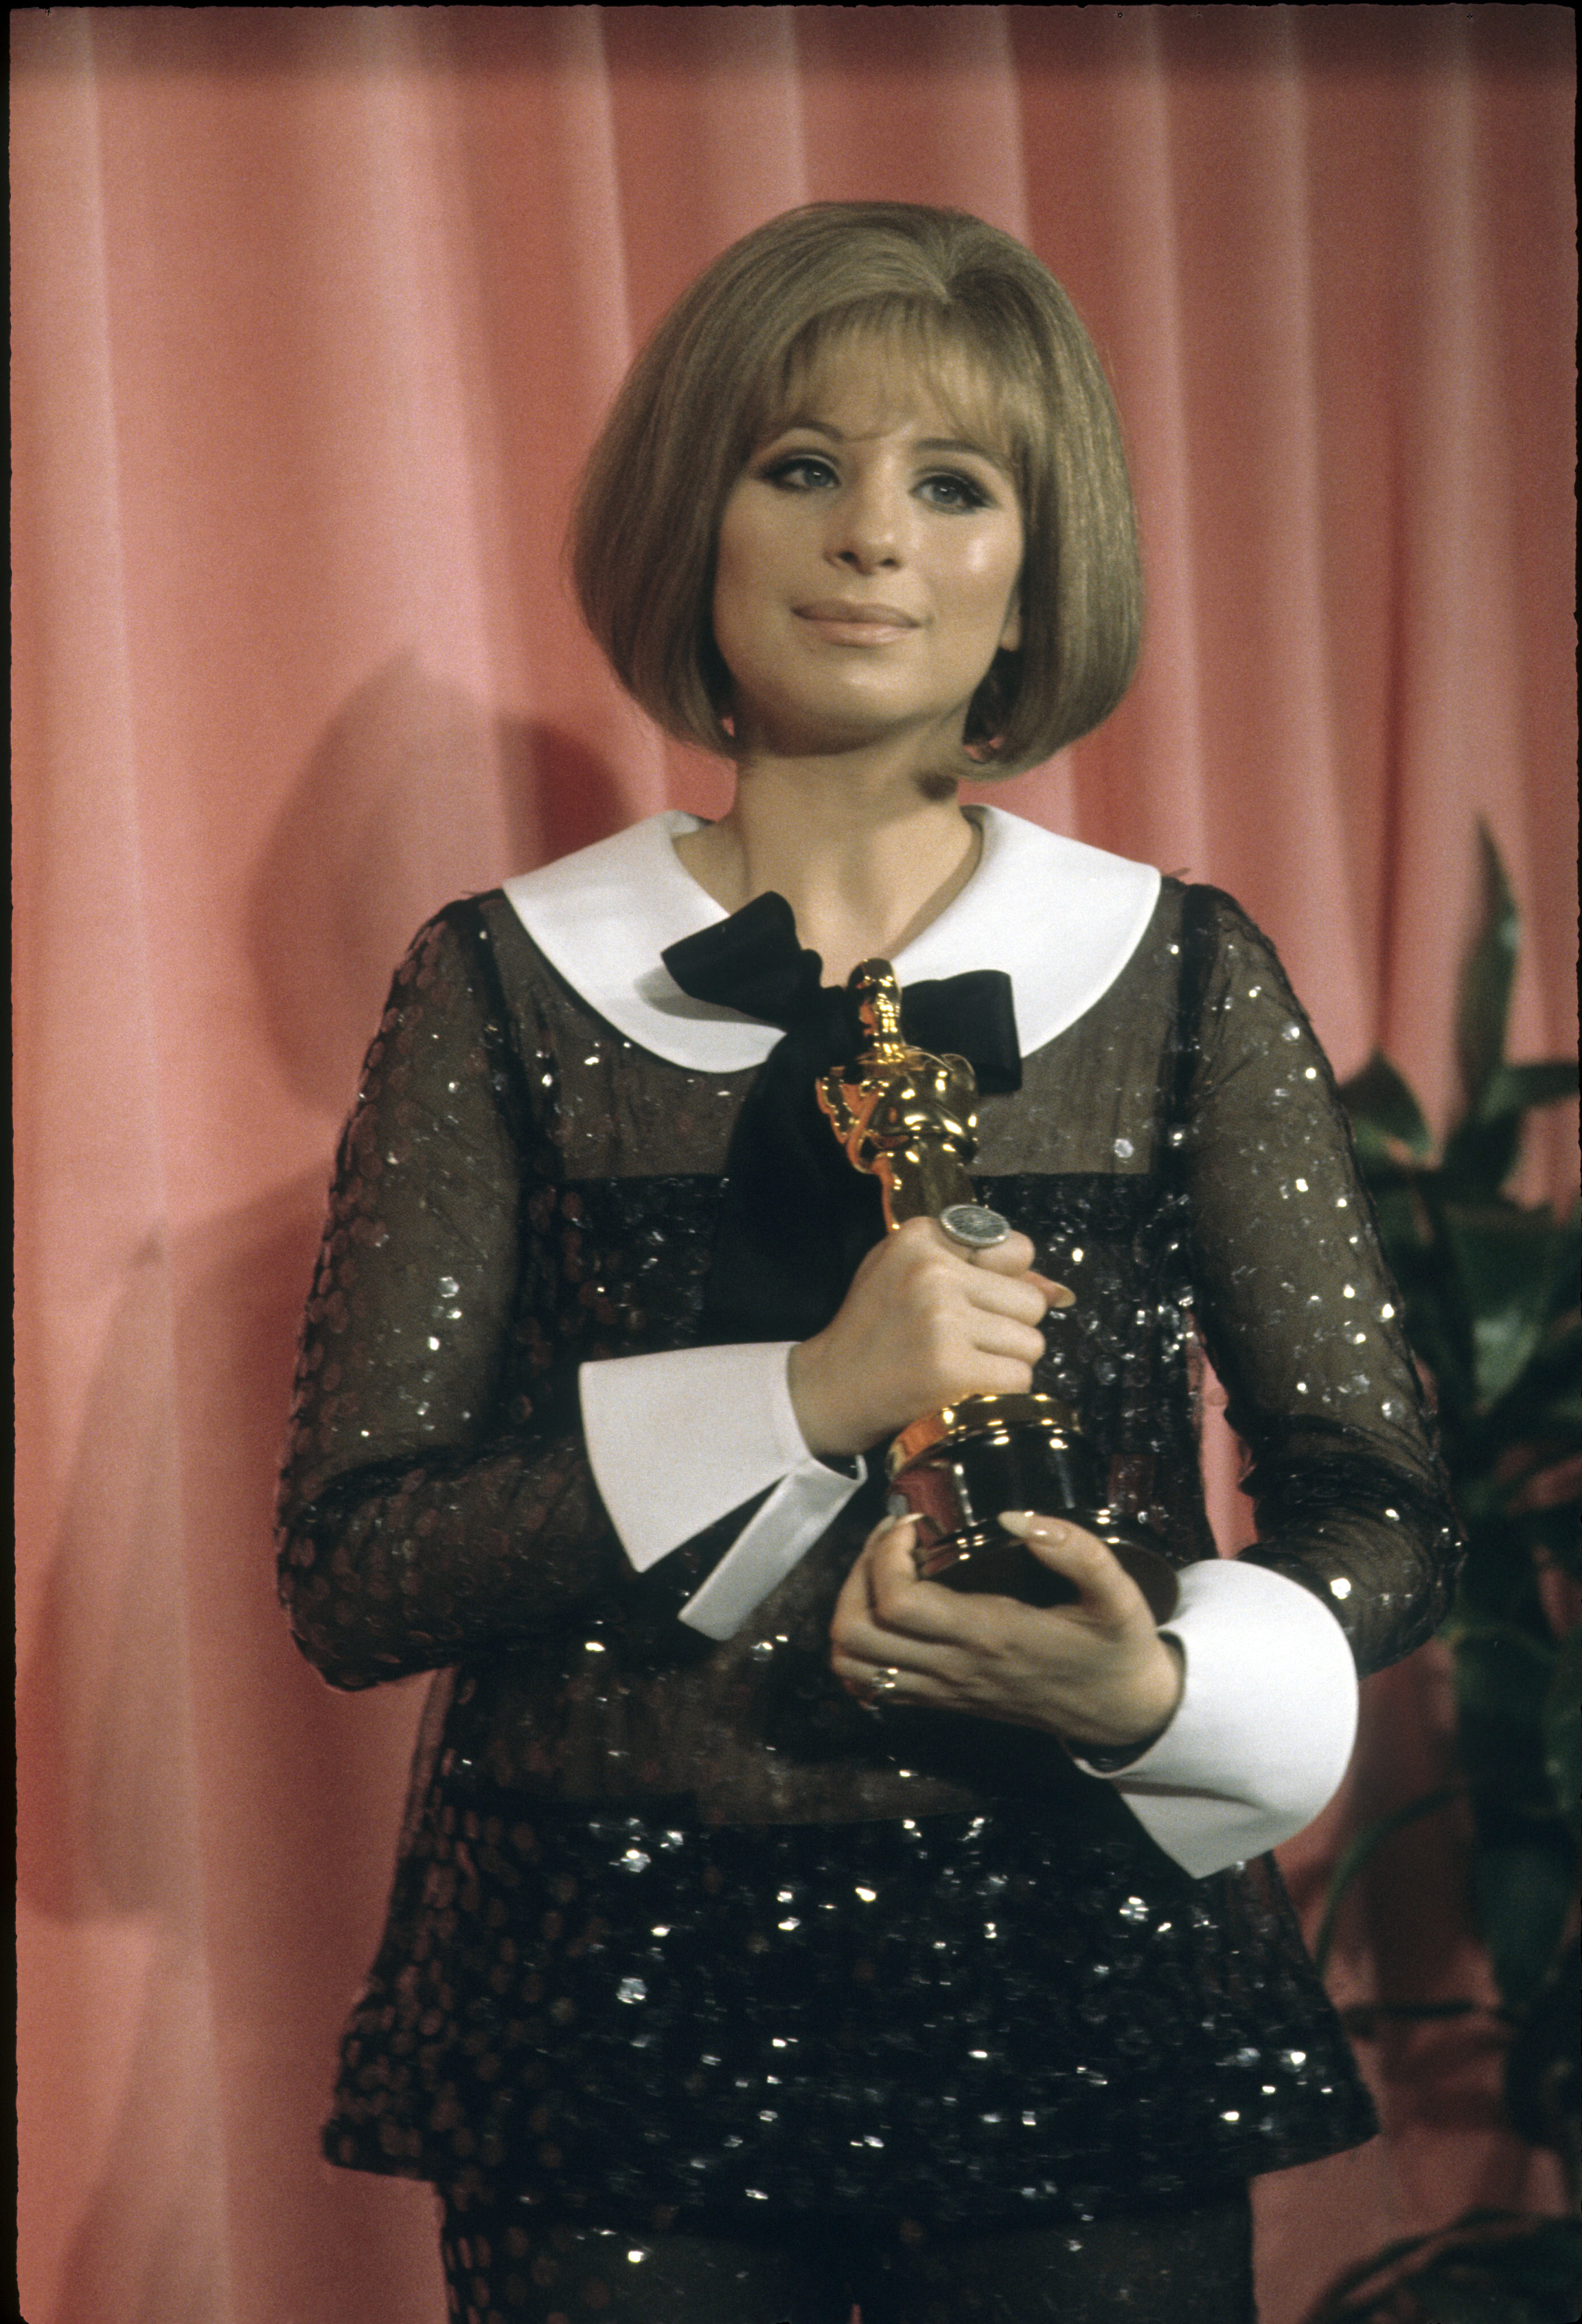 Barbra Streisand at the 41st Academy Awards on April 14, 1969 | Source: Getty Images